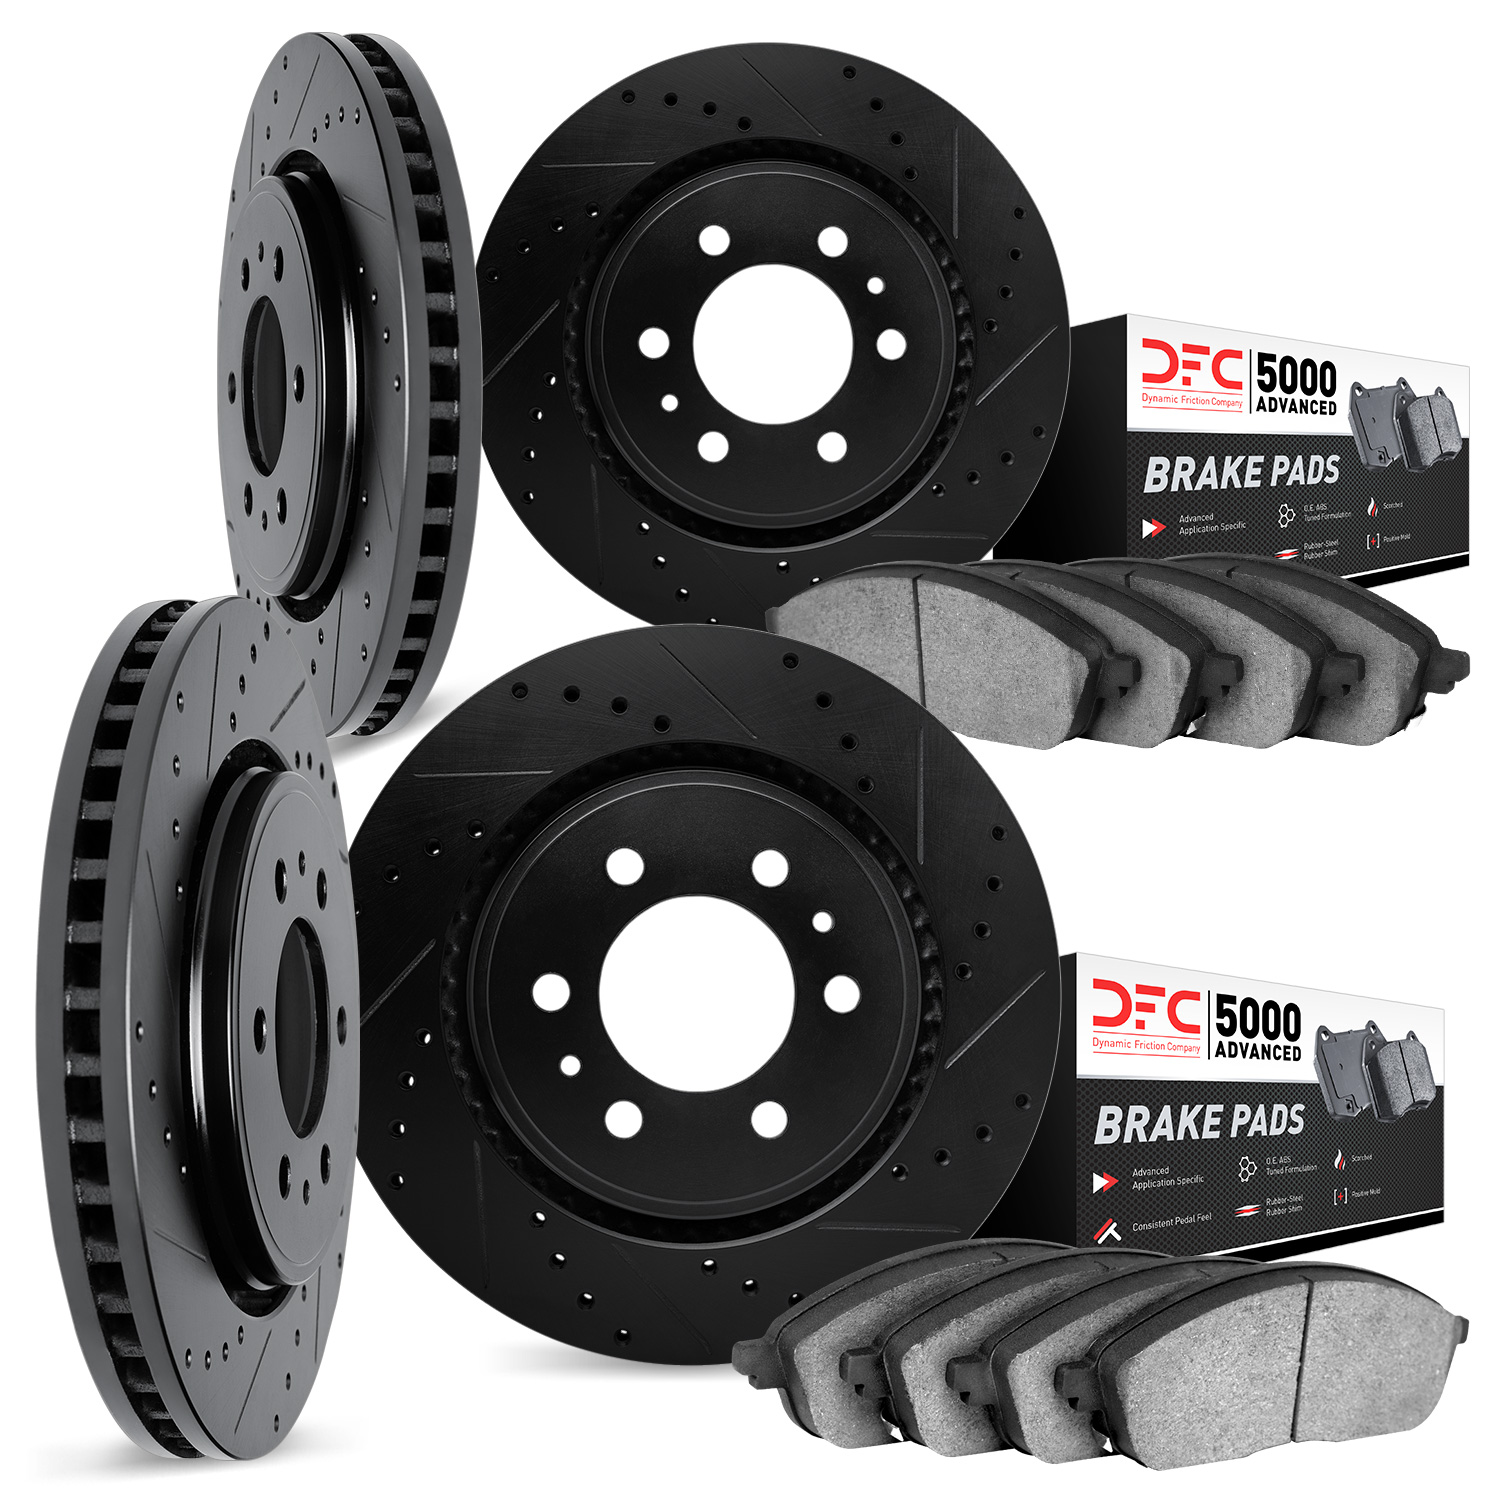 8504-48053 Drilled/Slotted Brake Rotors w/5000 Advanced Brake Pads Kit [Black], 2015-2020 GM, Position: Front and Rear